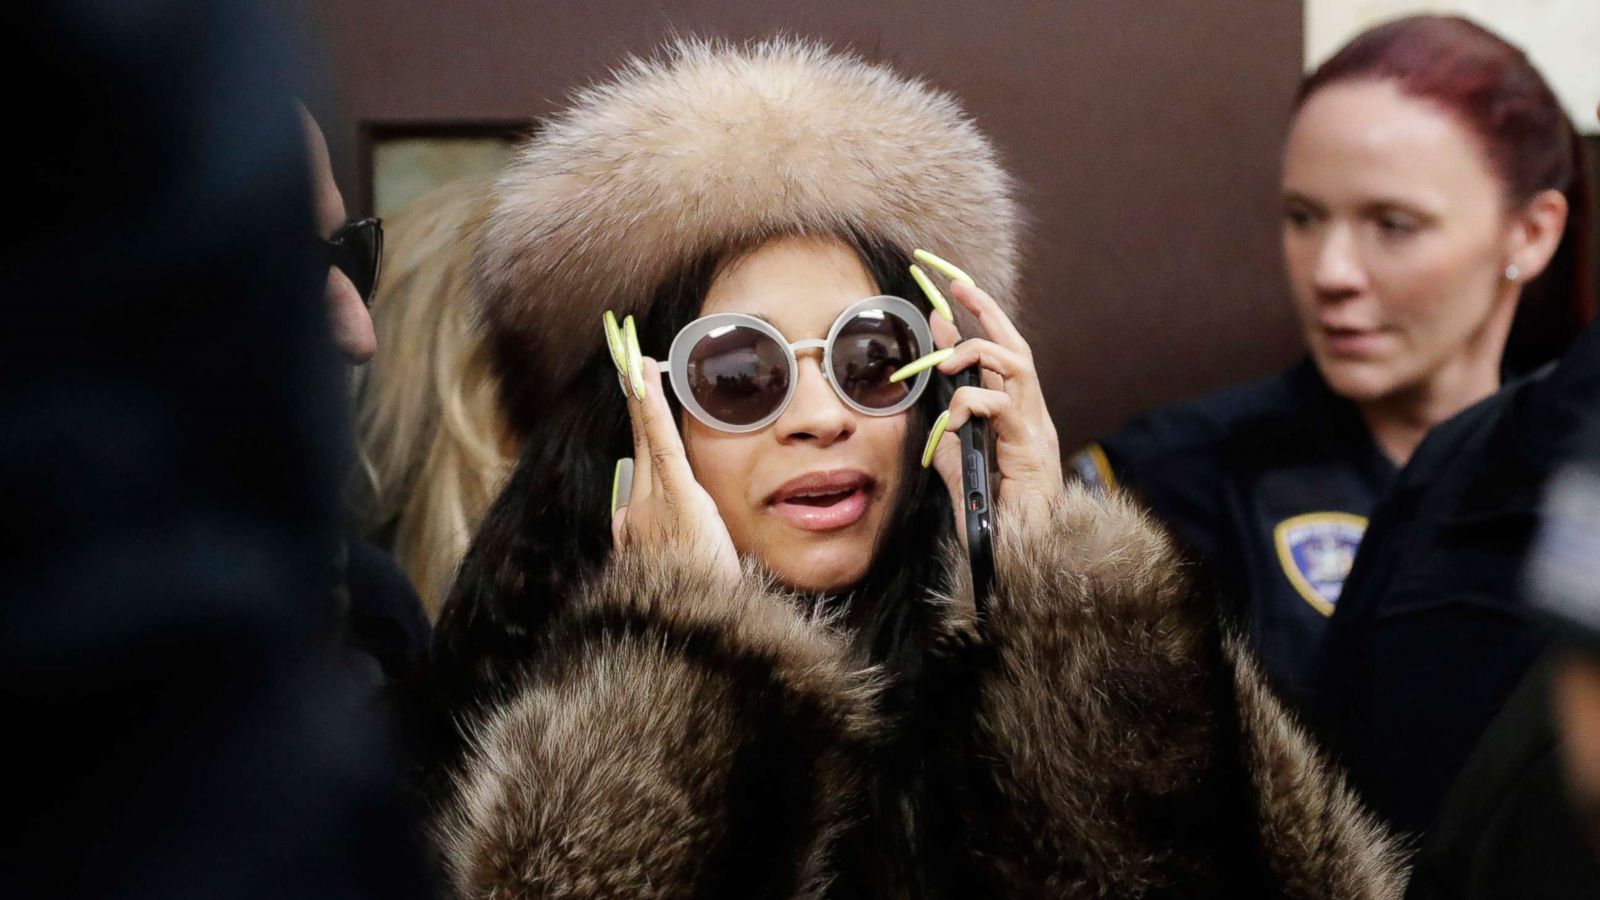 Cardi B Shows Up to Court in All-White and Shades for Alleged Strip Club  Brawl